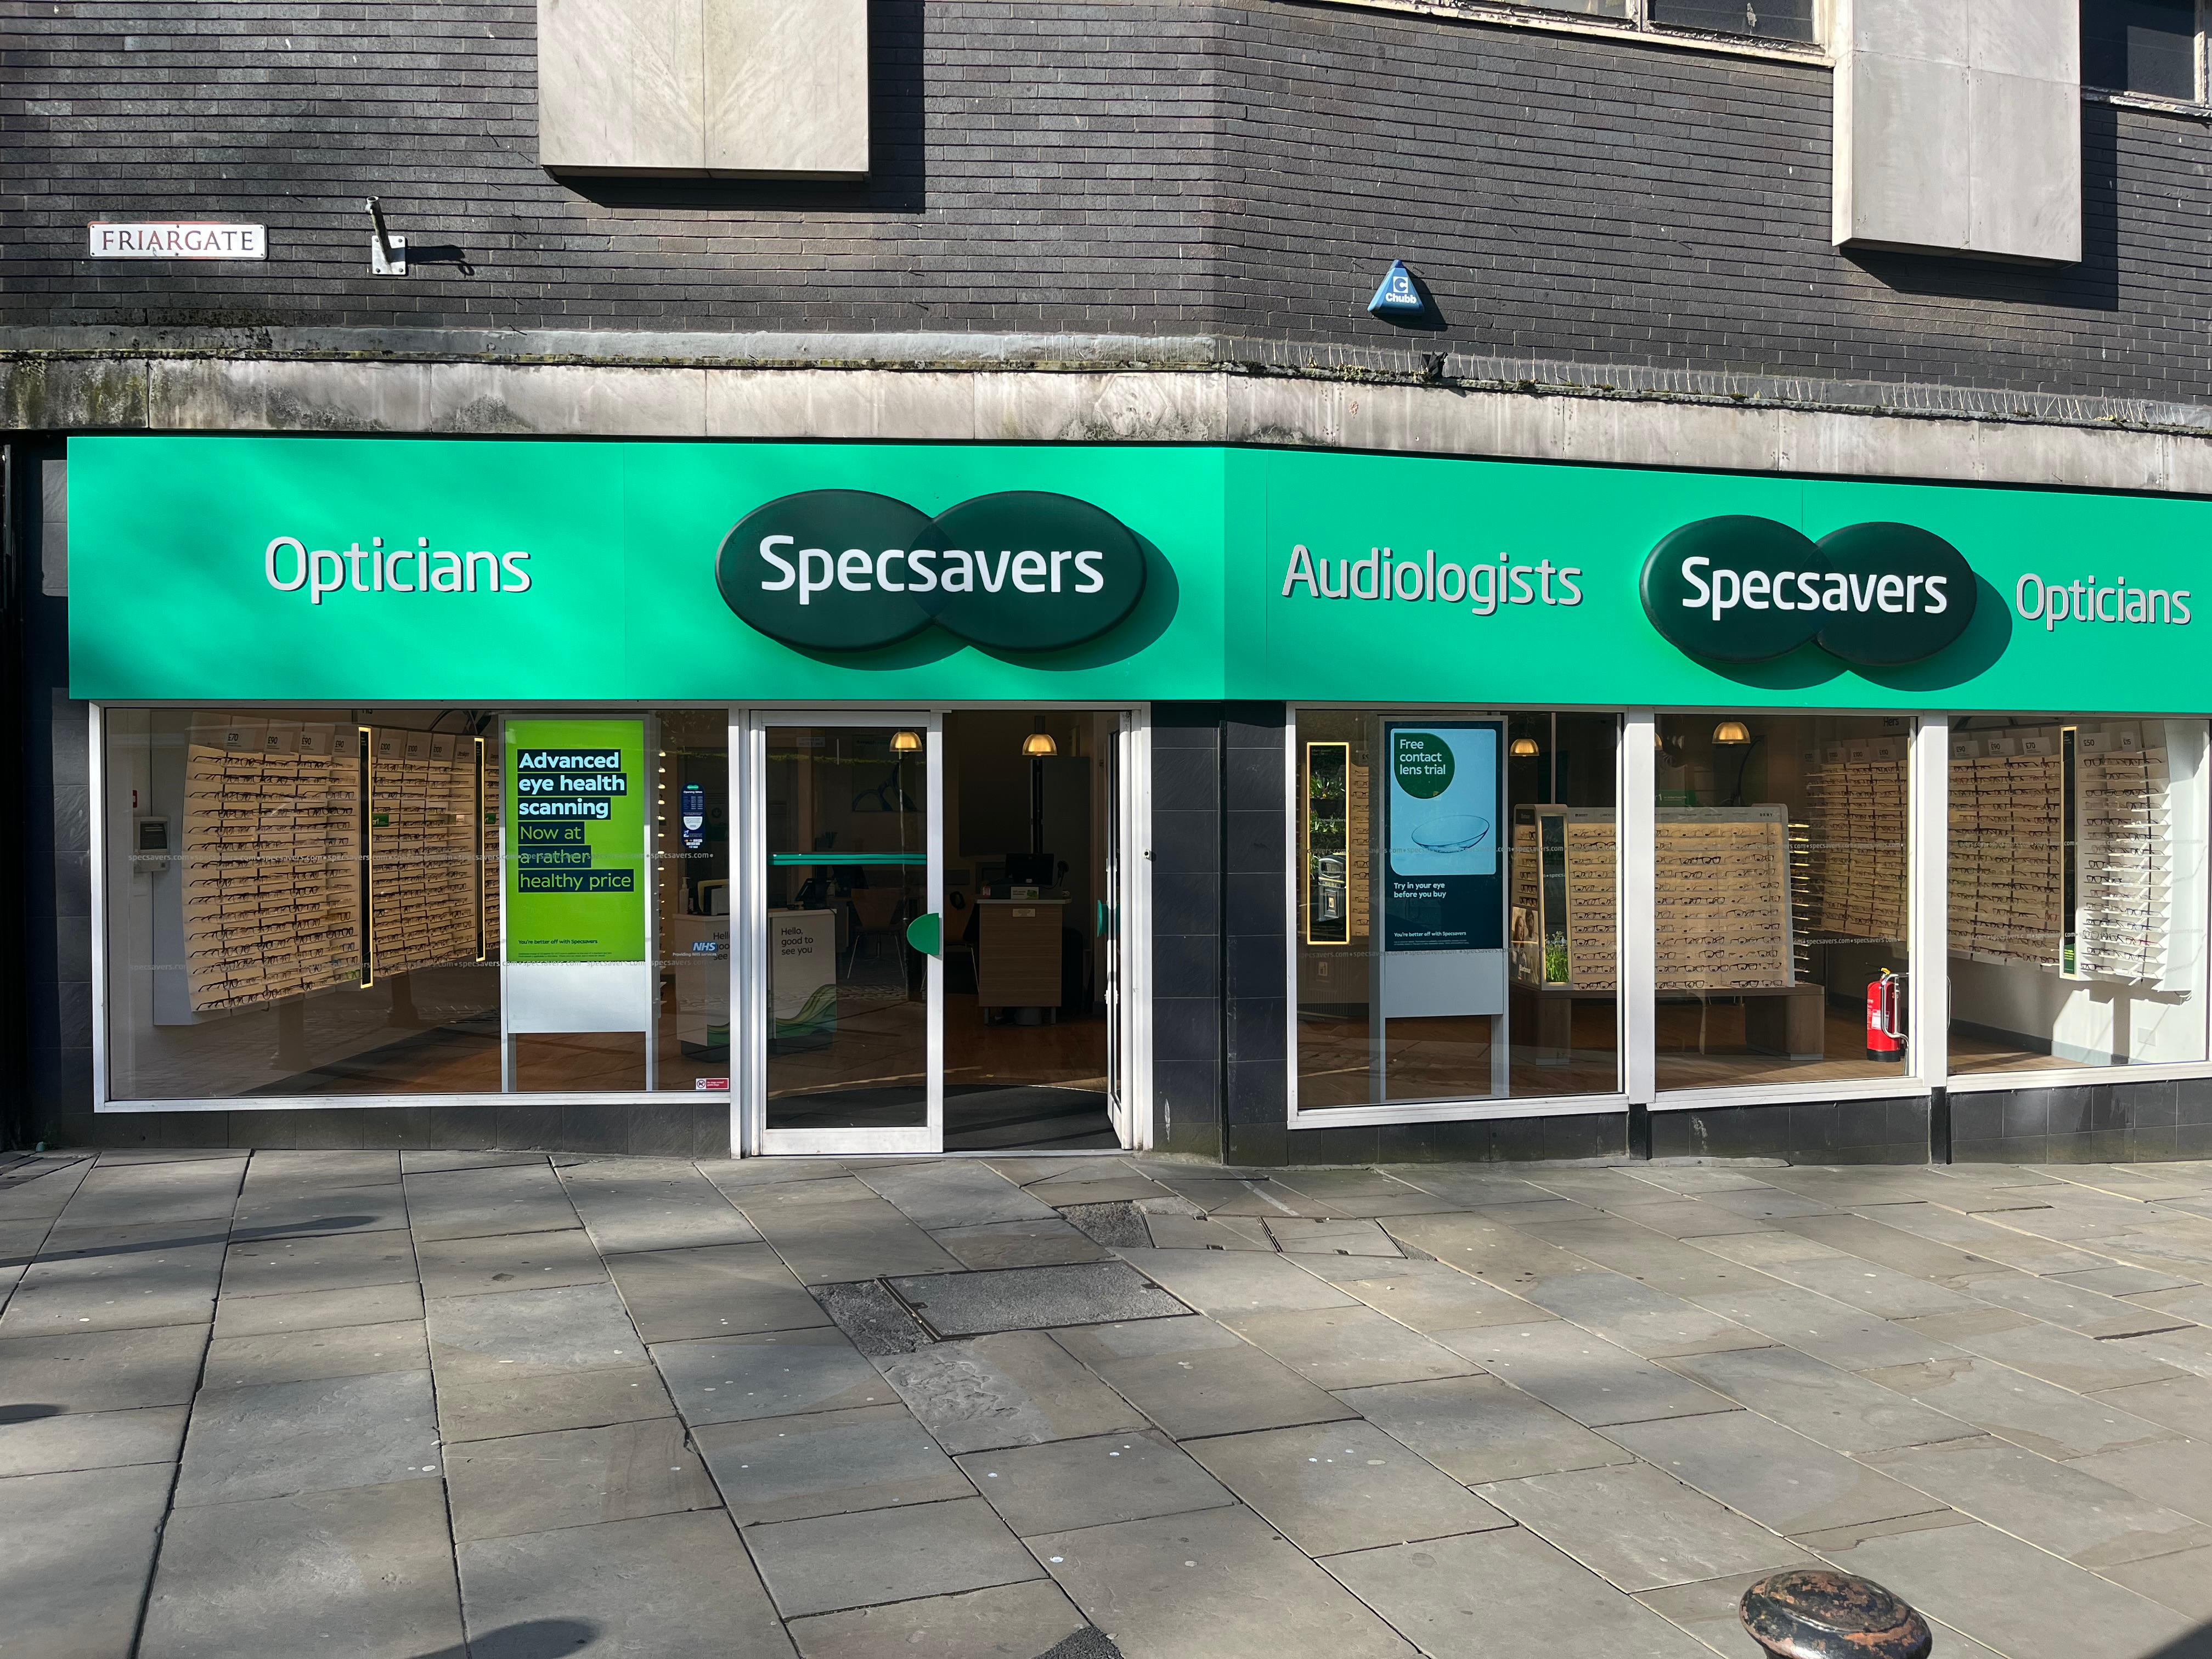 Images Specsavers Opticians and Audiologists - Preston